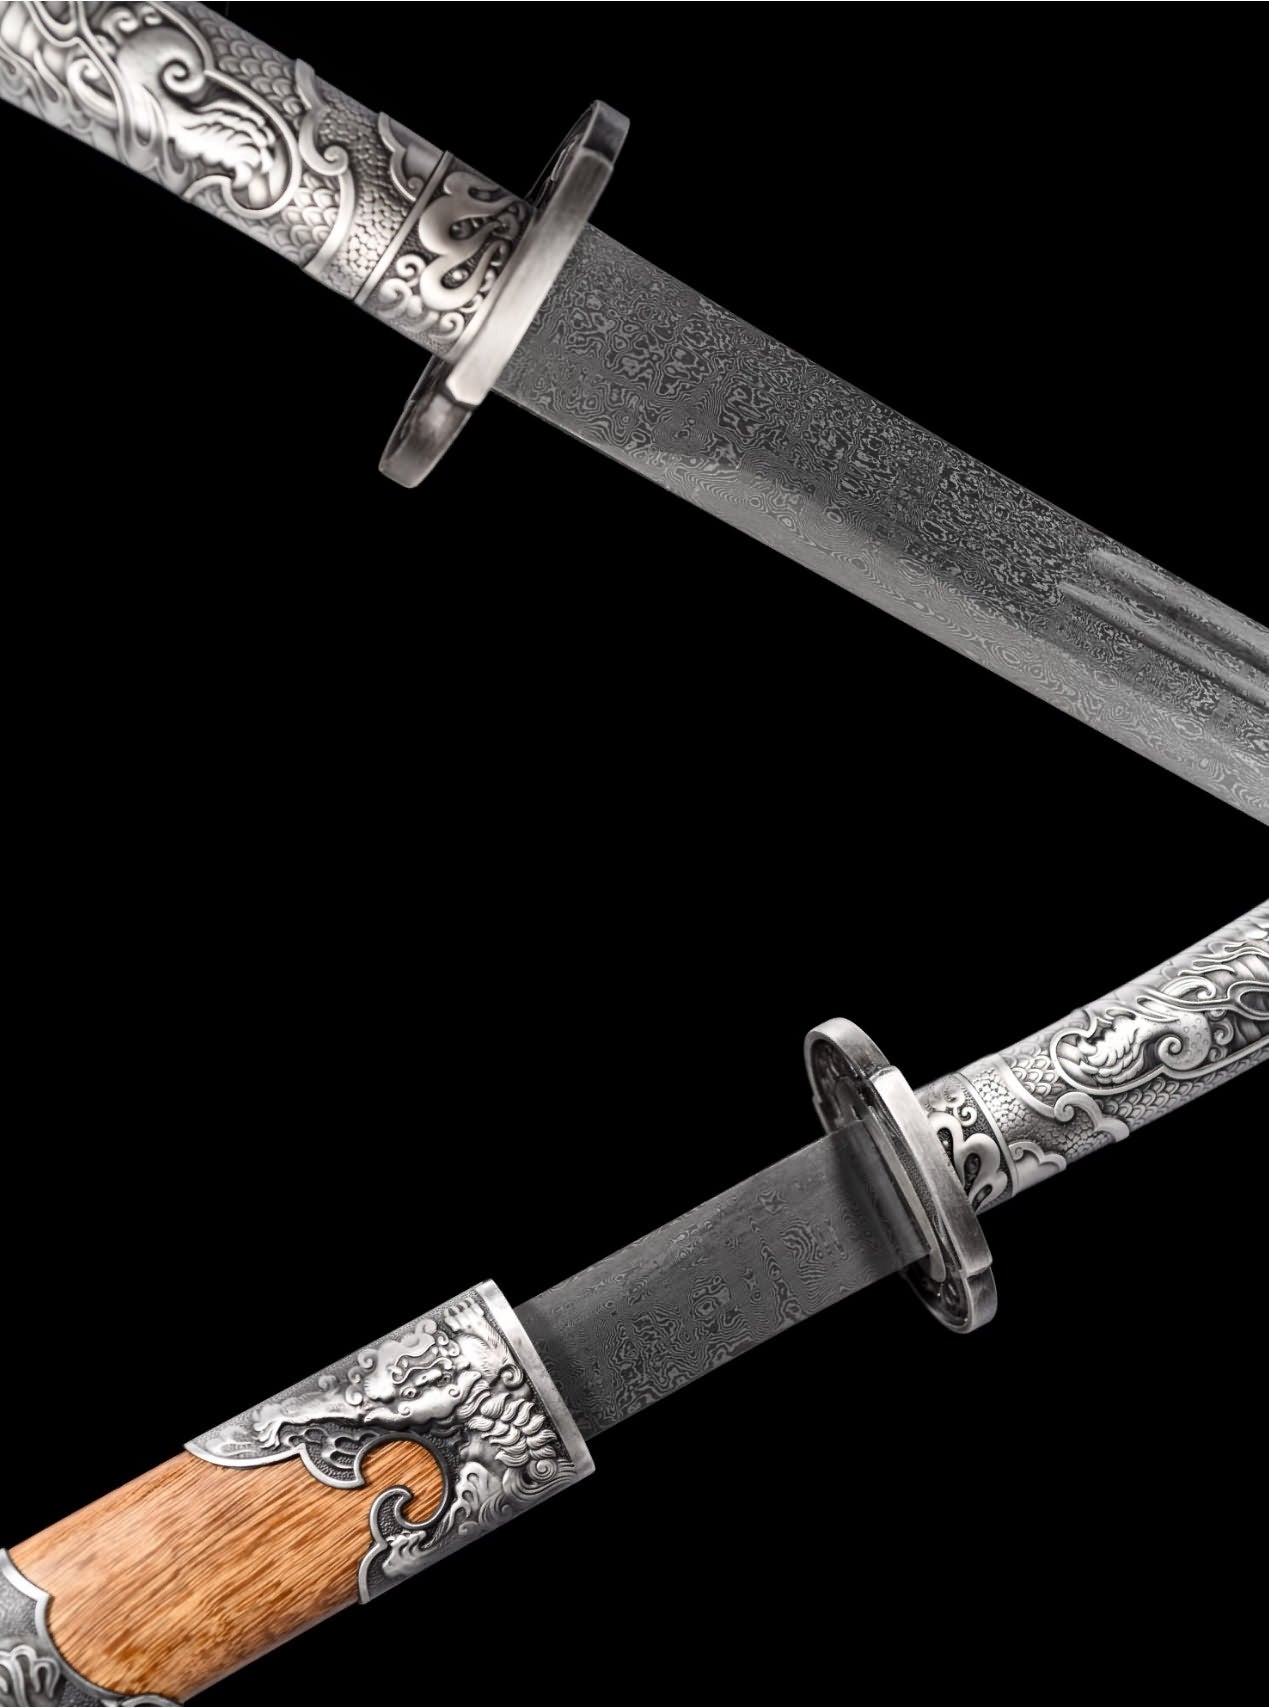 Qing dao Sword-Forged Damascus Steel Blade with Alloy Fittings-Battle Ready